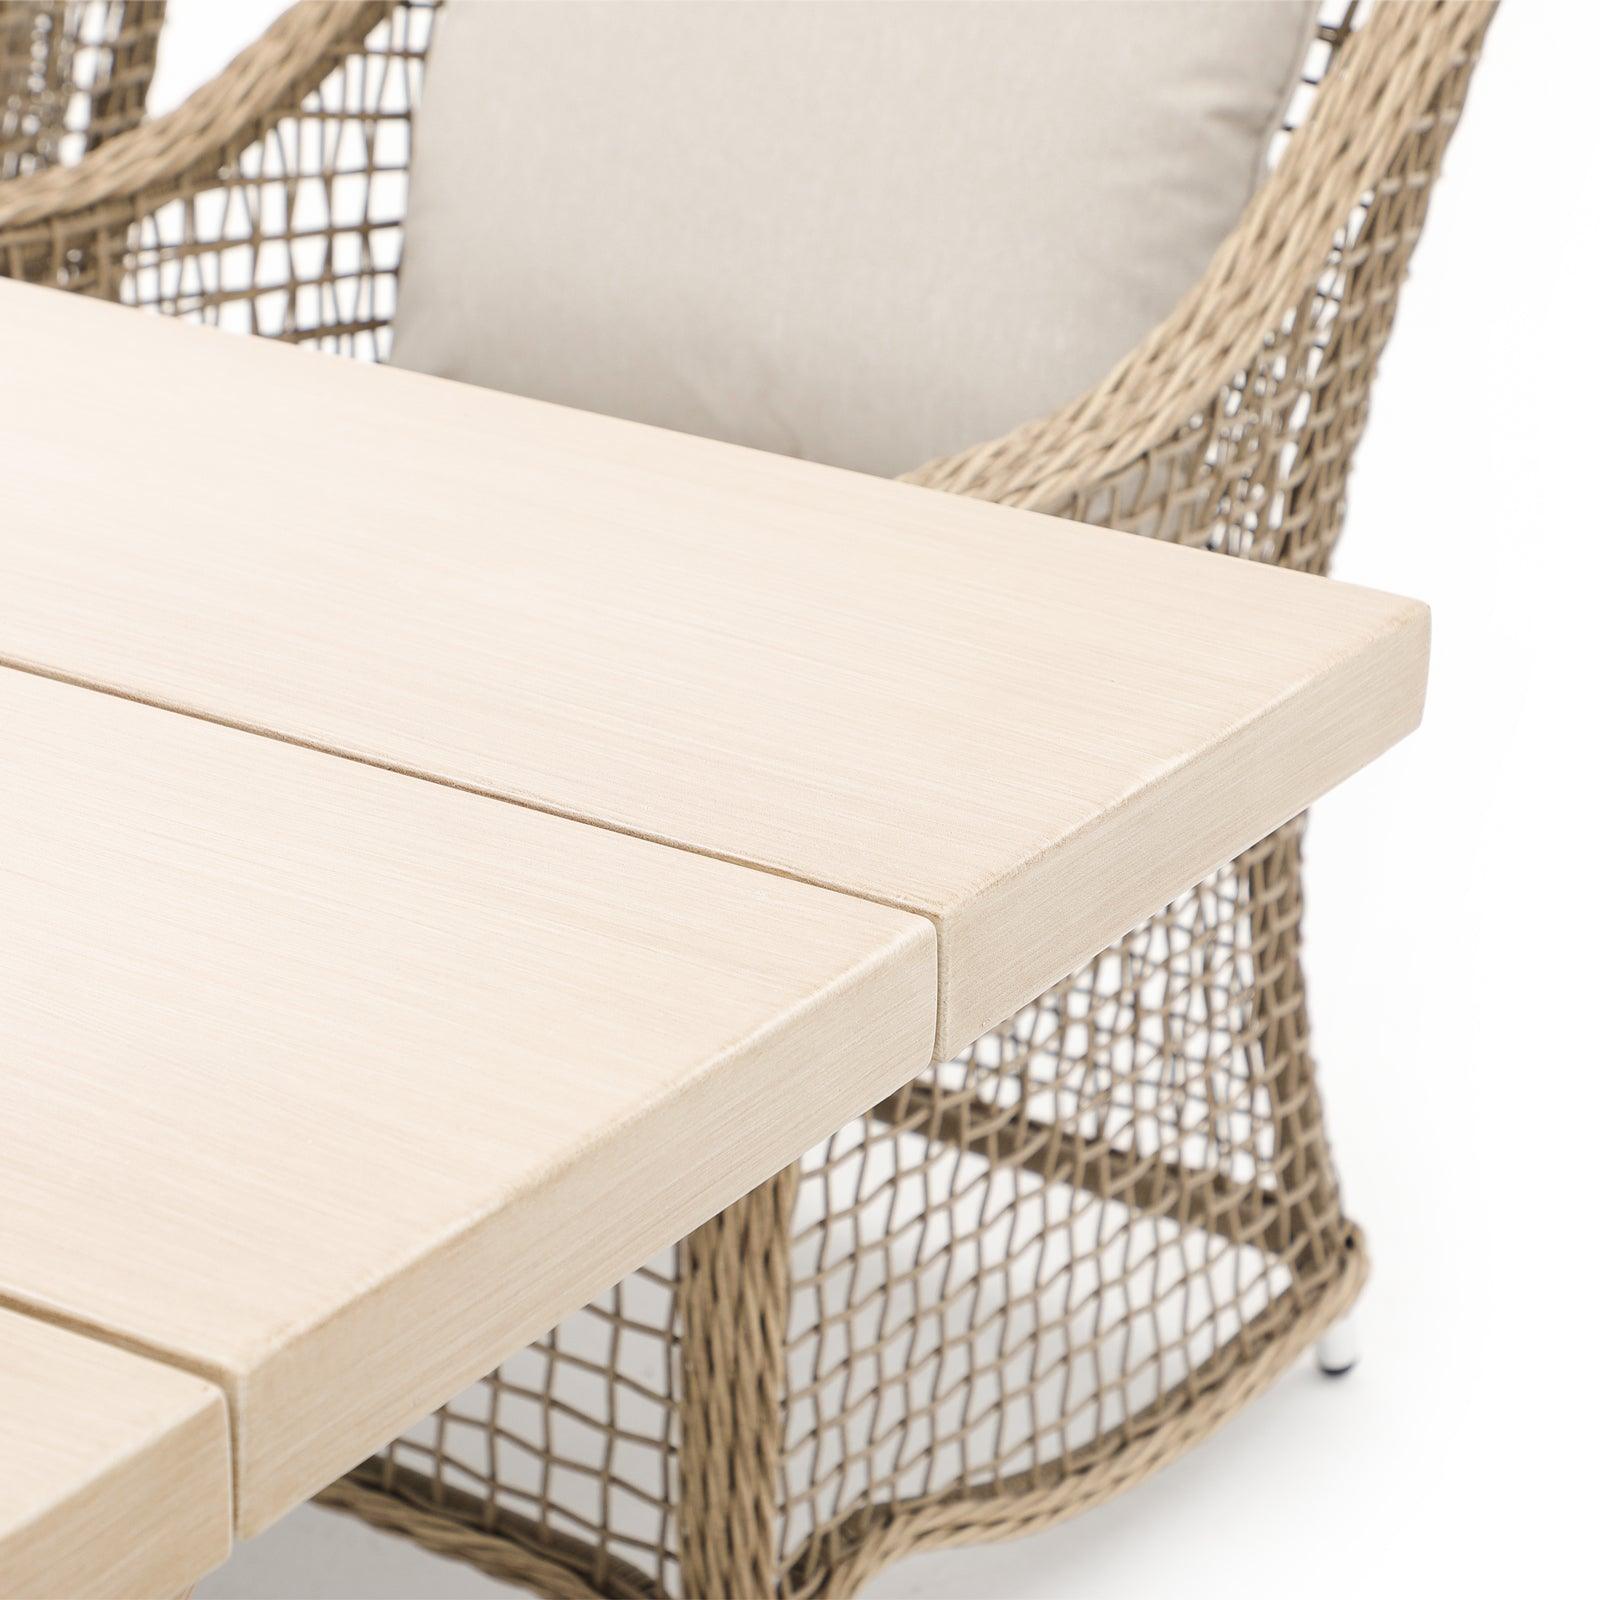 Irati beige outdoor dining table with chair